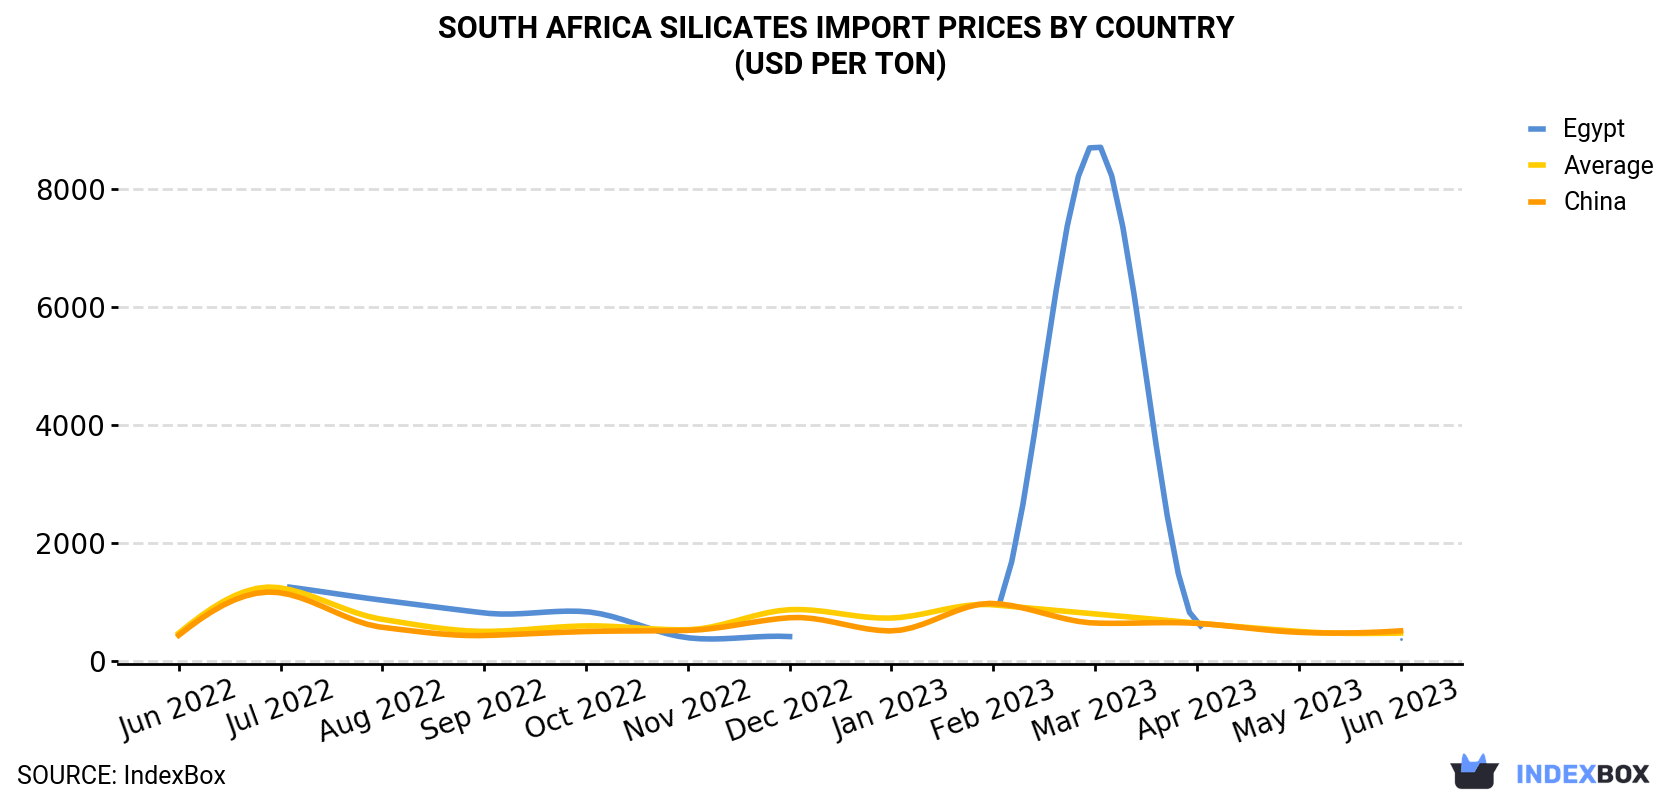 South Africa Silicates Import Prices By Country (USD Per Ton)